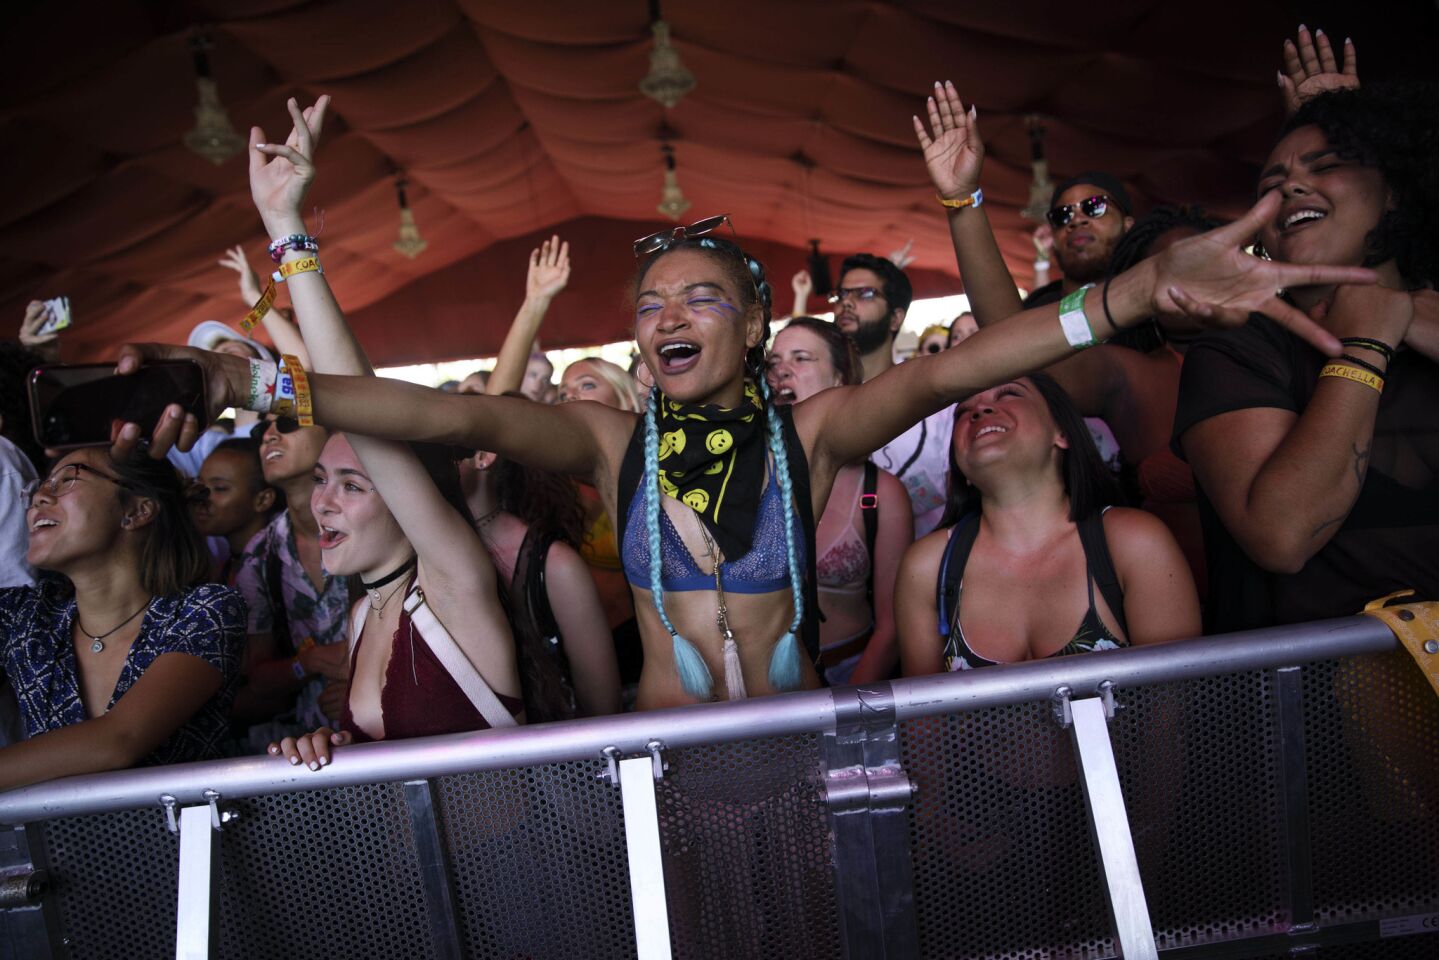 Kiara Price, center, raises her arms in the crowd as British singer-songwriter Neo Jessica Joshua, known as NAO, performs during weekend one of the three-day Coachella Valley Music and Arts Festival at the Empire Polo Grounds on Sunday, April 16, 2017 in Indio, Calif. (Patrick T. Fallon/ For The Los Angeles Times)